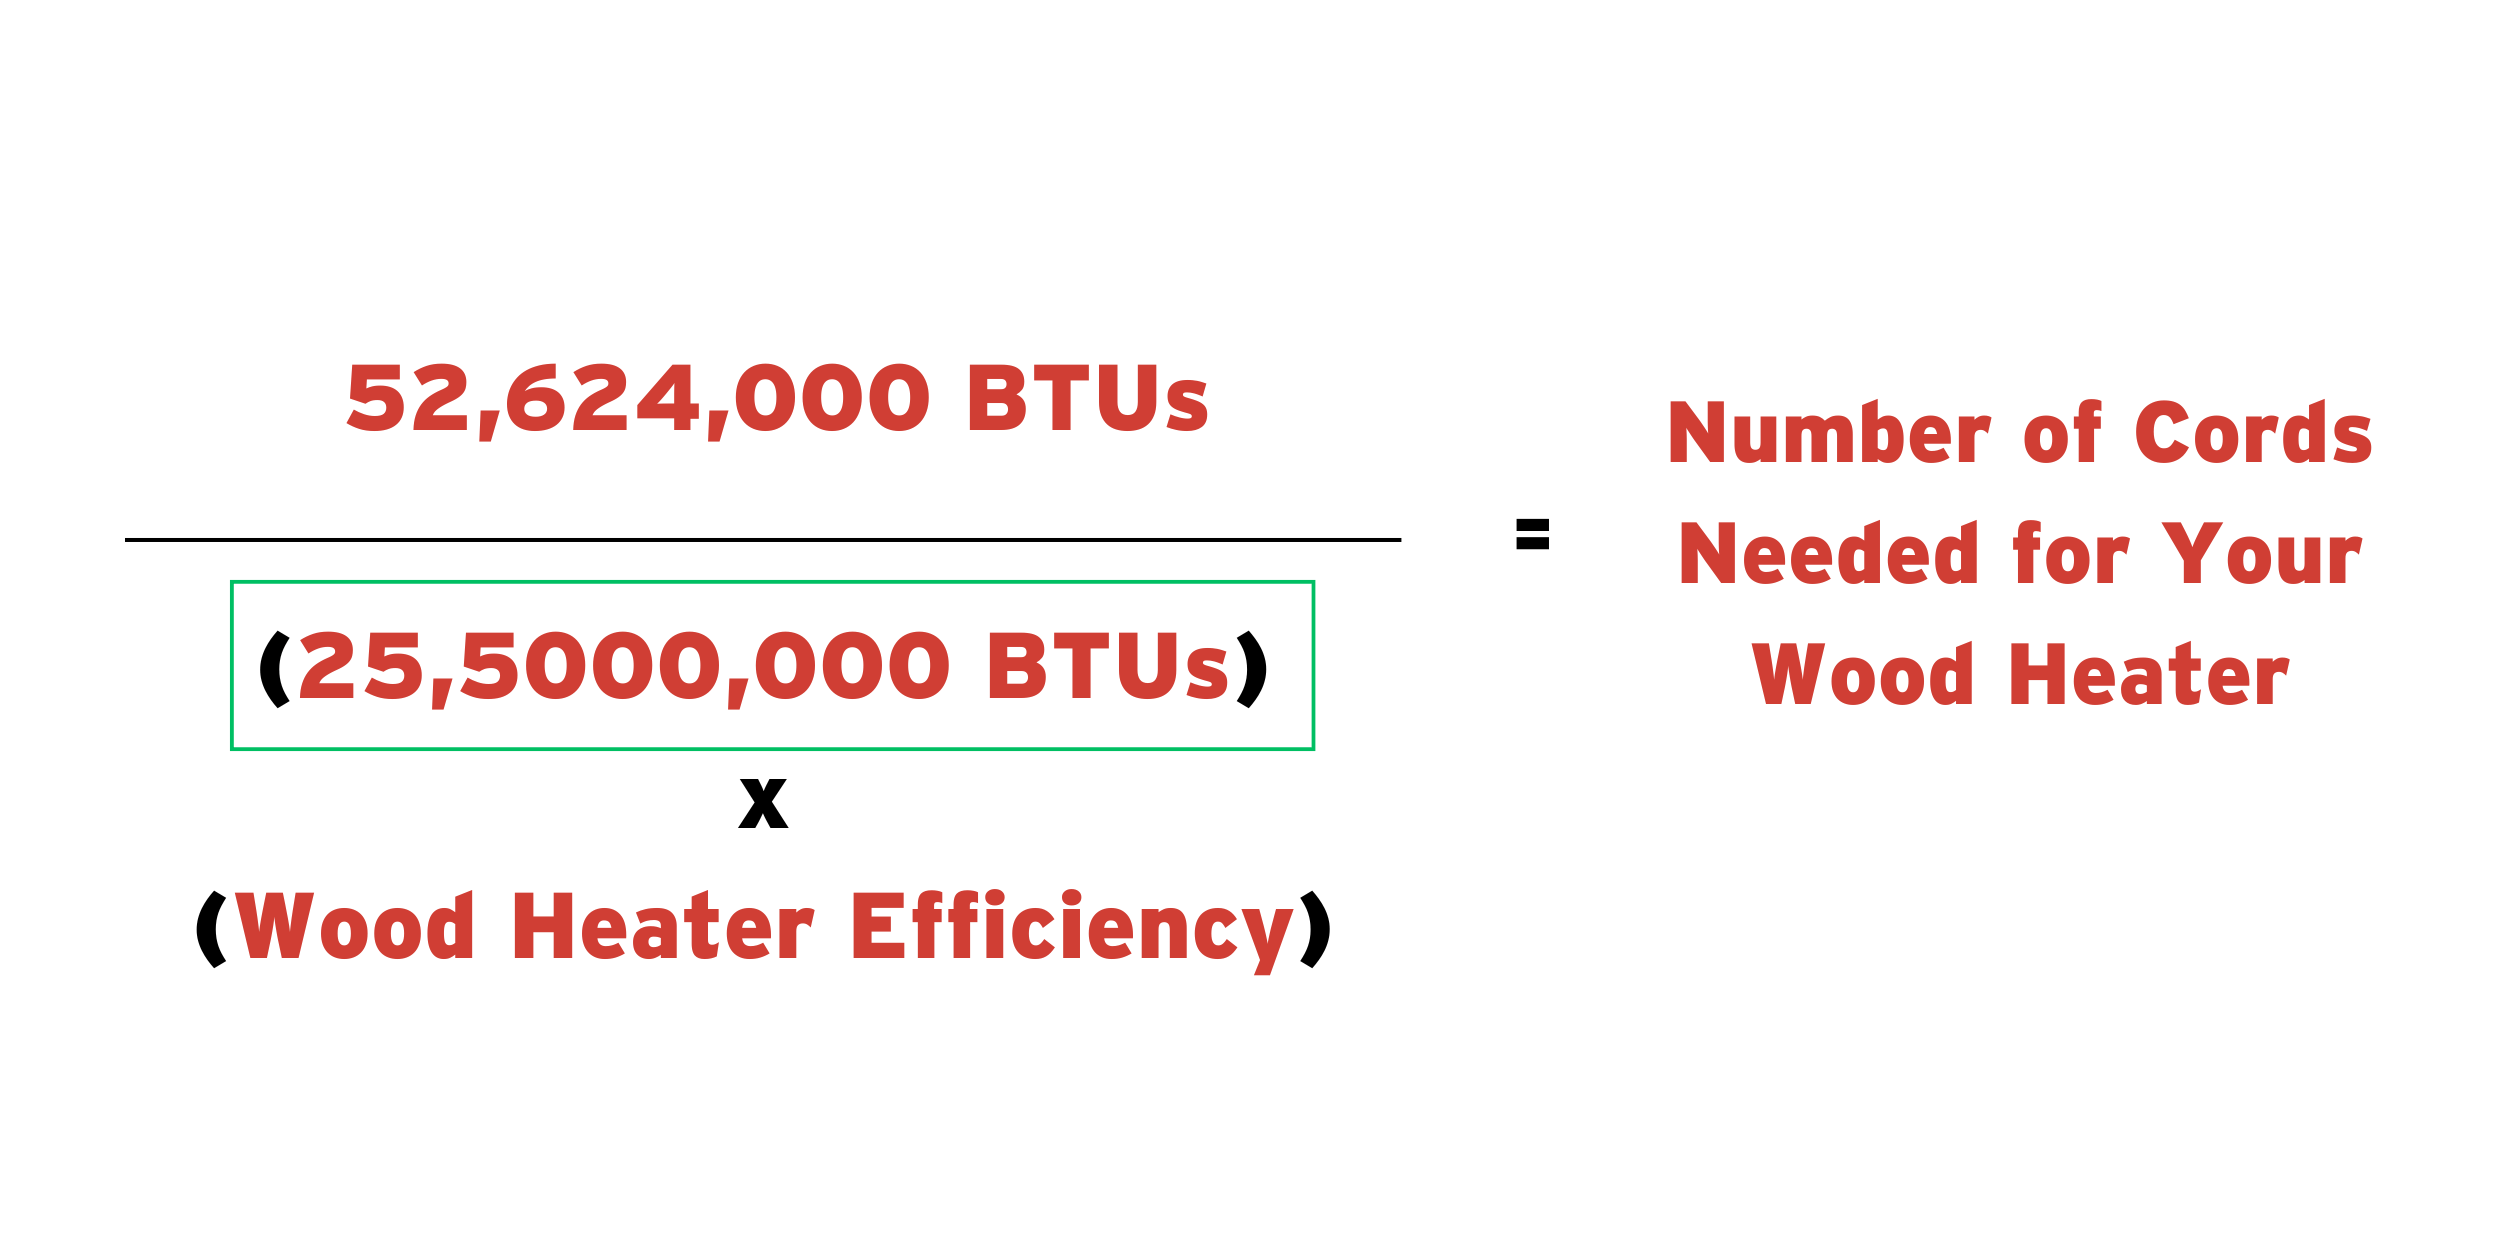 The formula for the total number of cords of wood needed for a wood heater with 25,500,000 BTUs plugged into the denominator.